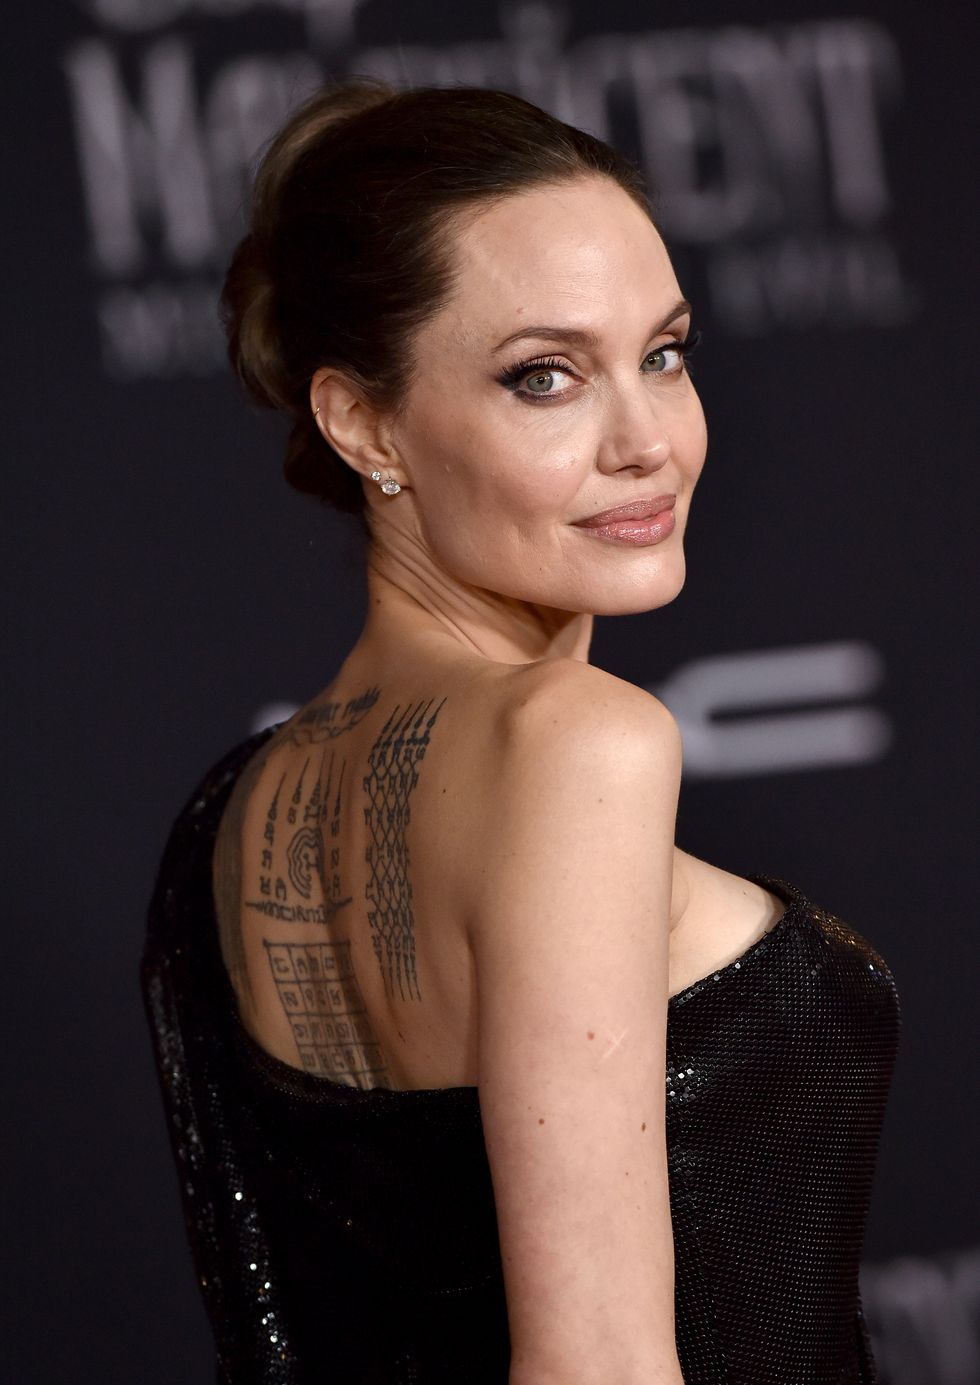 Angelina Jolie Reveals Why She "Wouldn't Be an Actress Today"